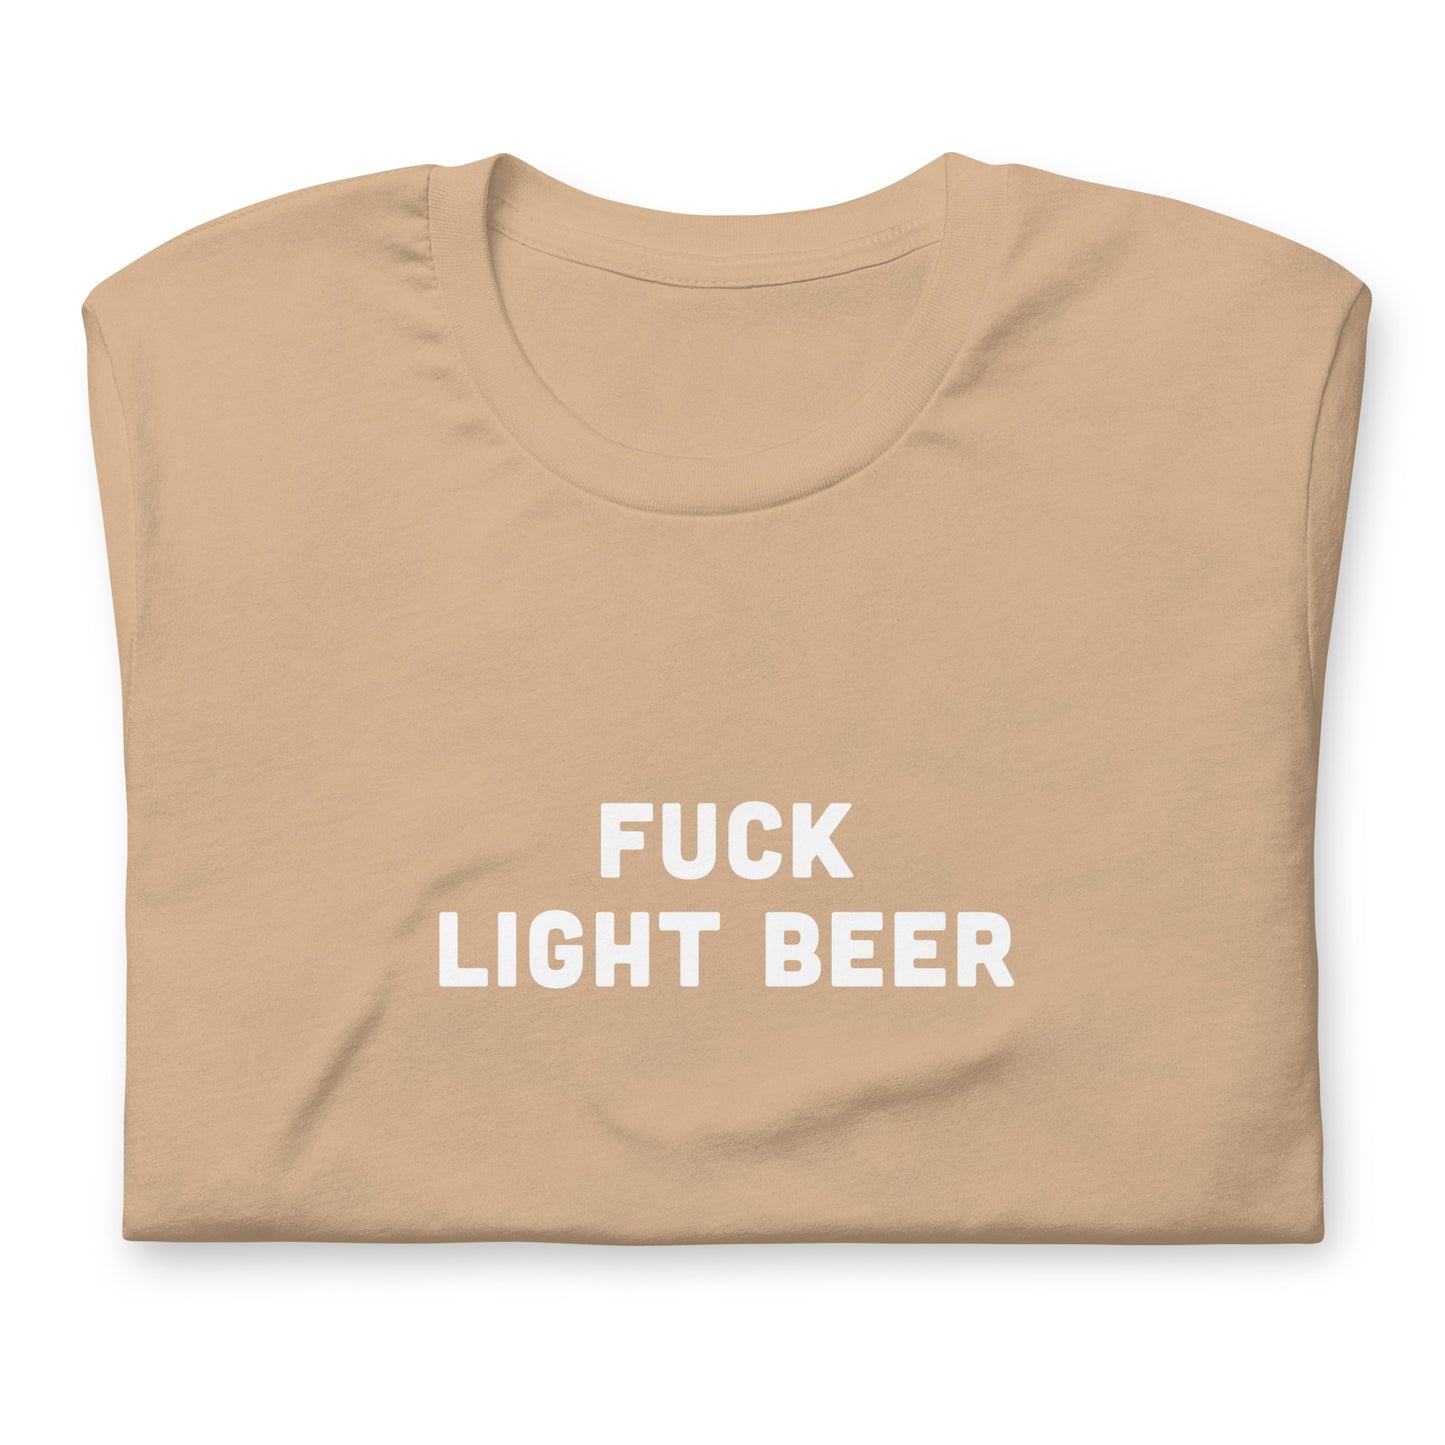 Fuck Light Beer T-Shirt Size 2XL Color Forest